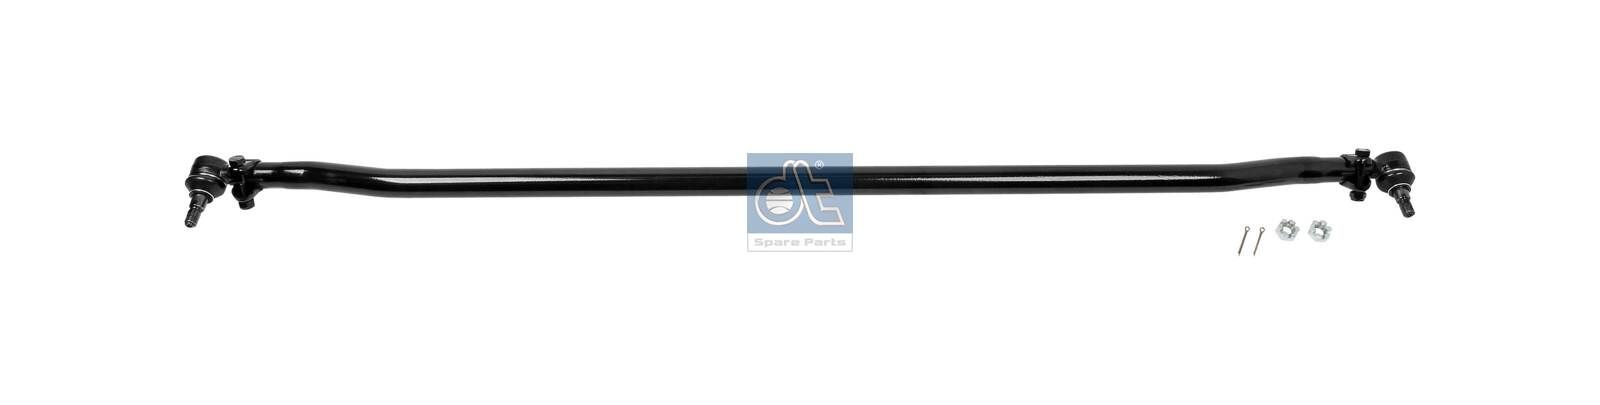 DT Spare Parts 4.67440 Rod Assembly 602 330 0003